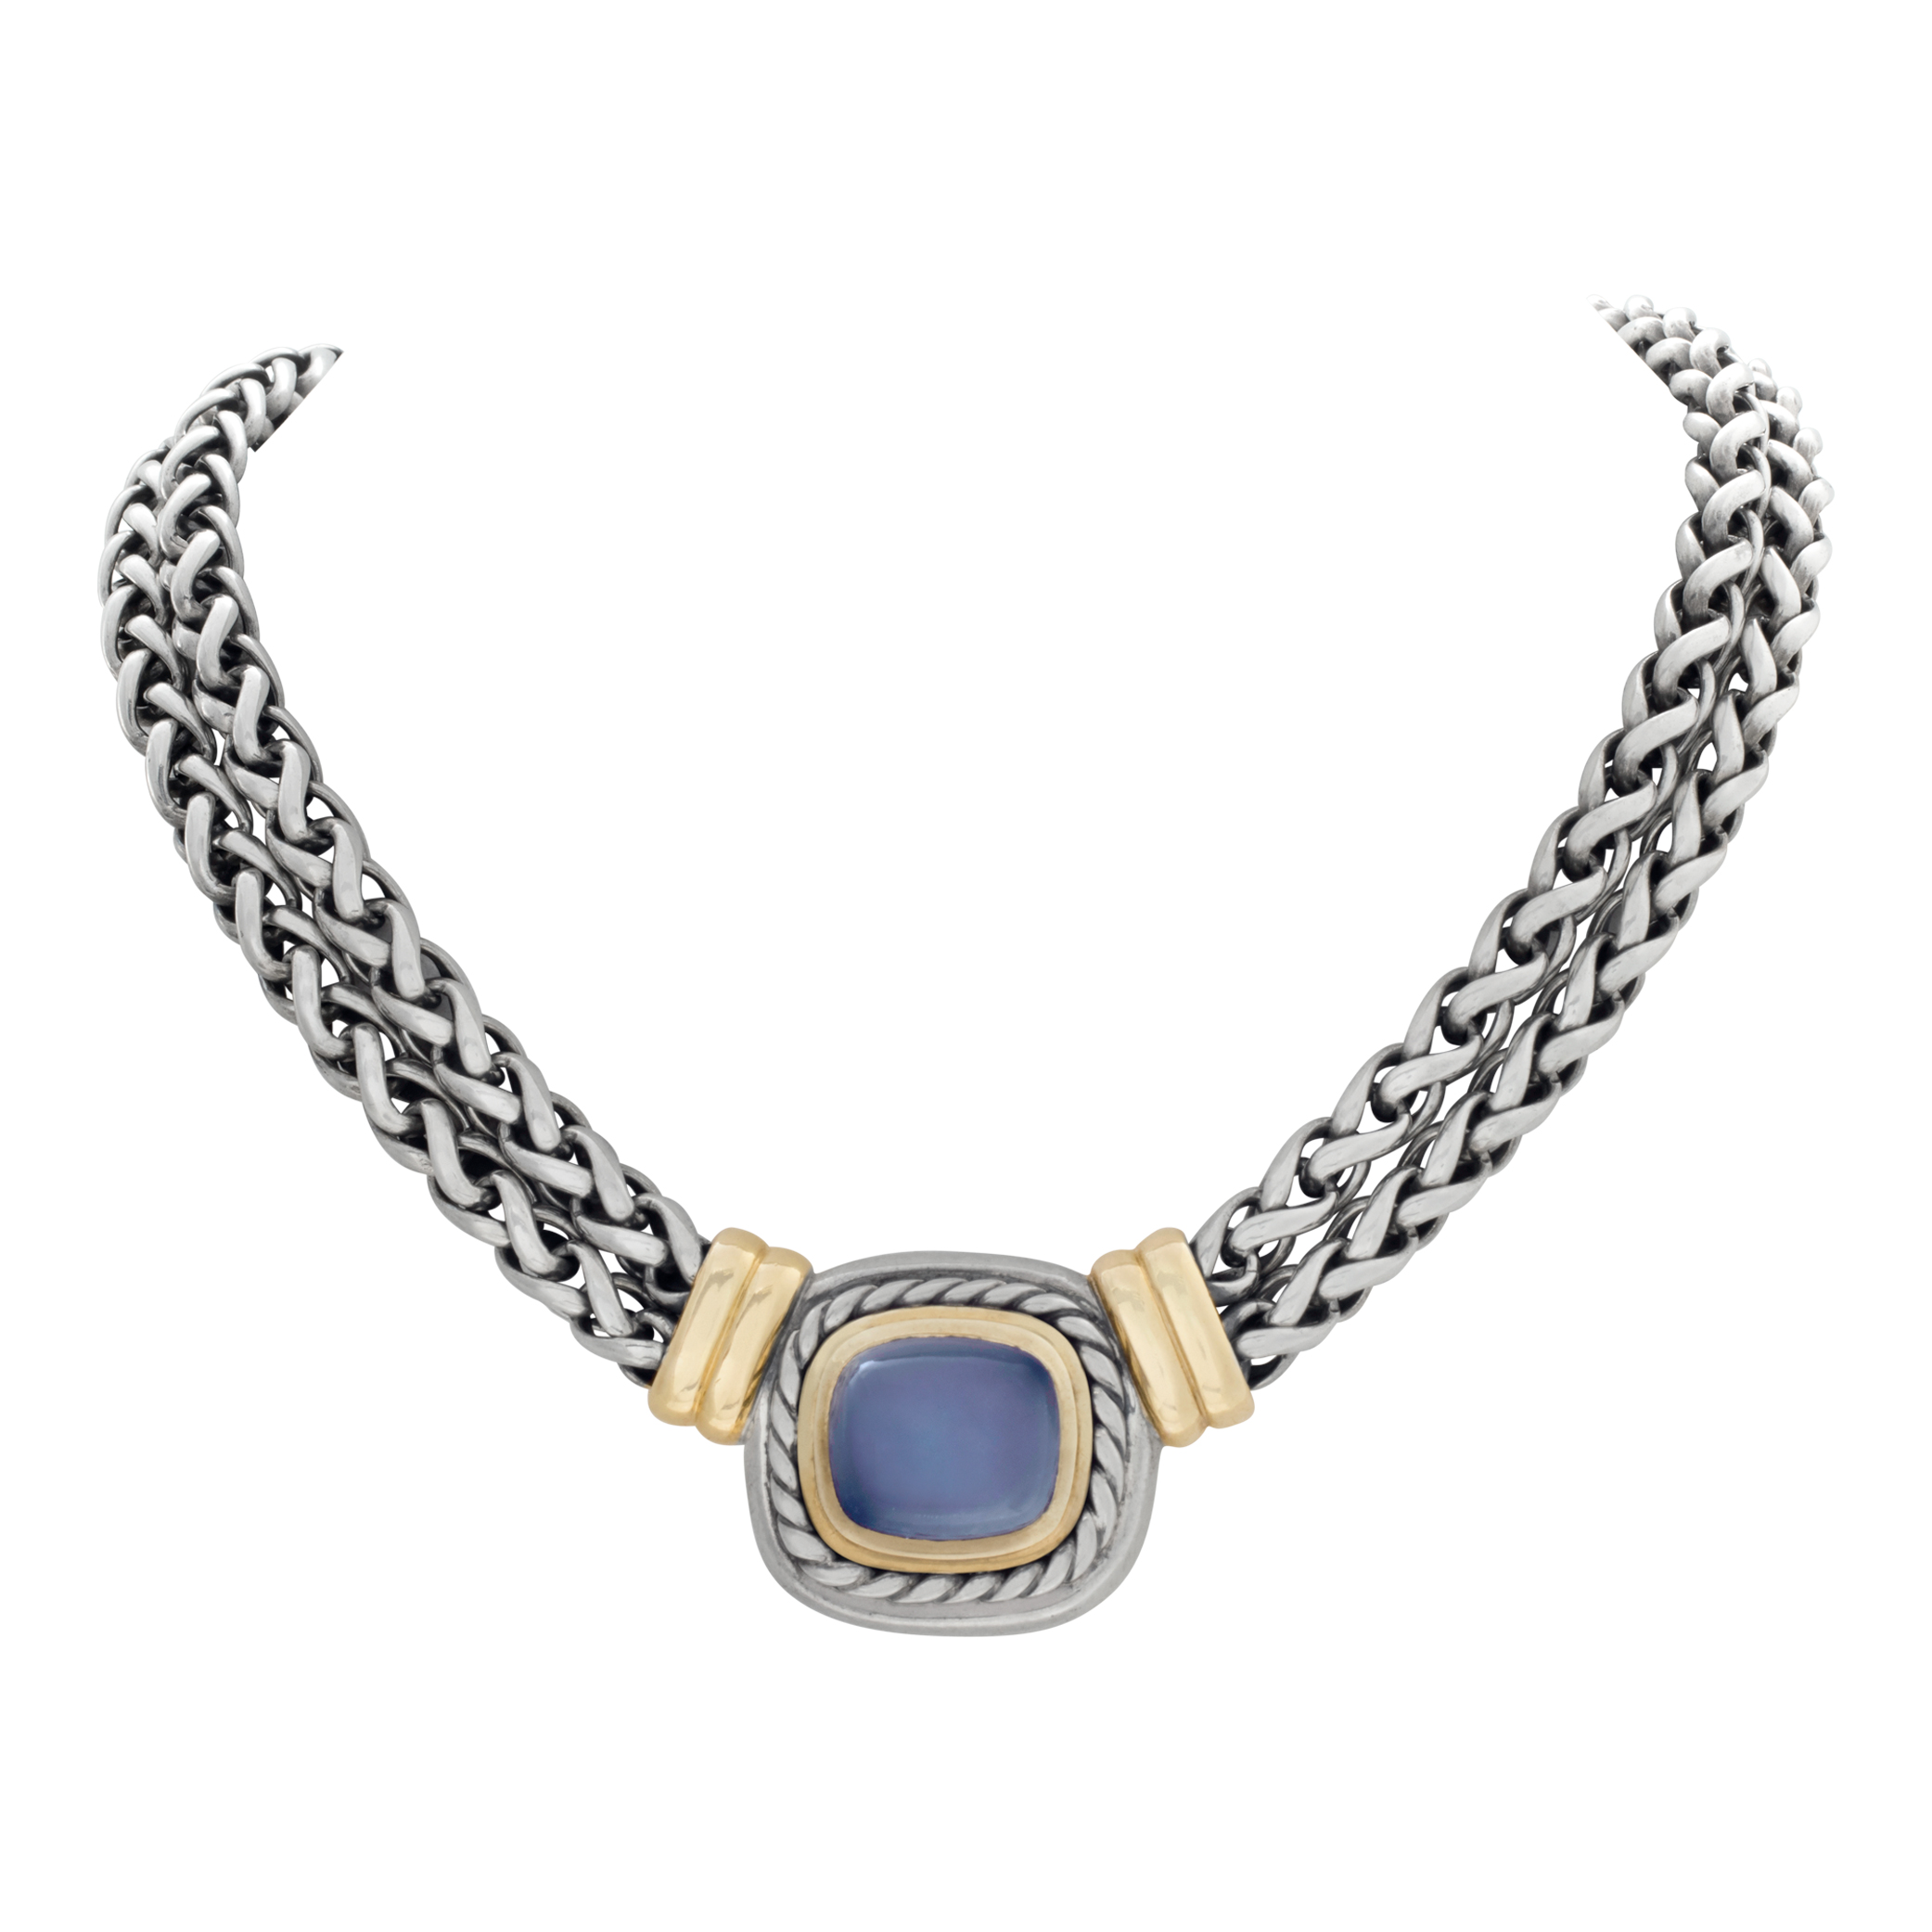 David Yurman14k & Sterling Silver, Double Stranded Necklace With Cabochon Calcedony Center Motif.